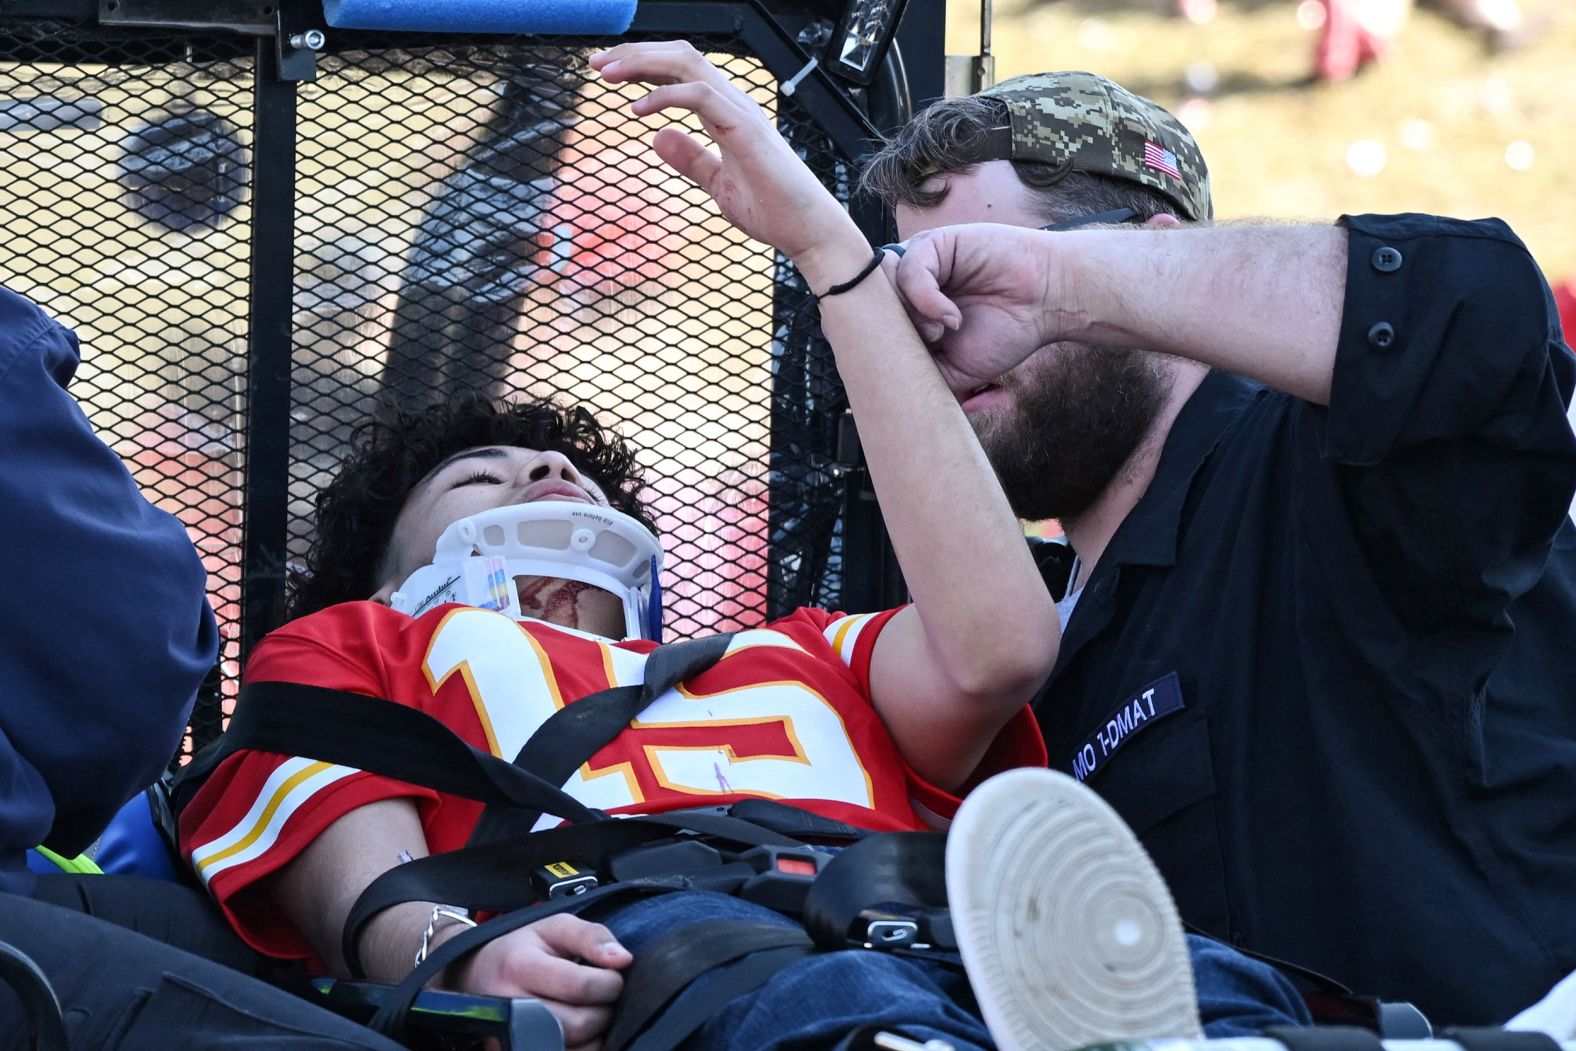 A person receives medical treatment after the shooting.